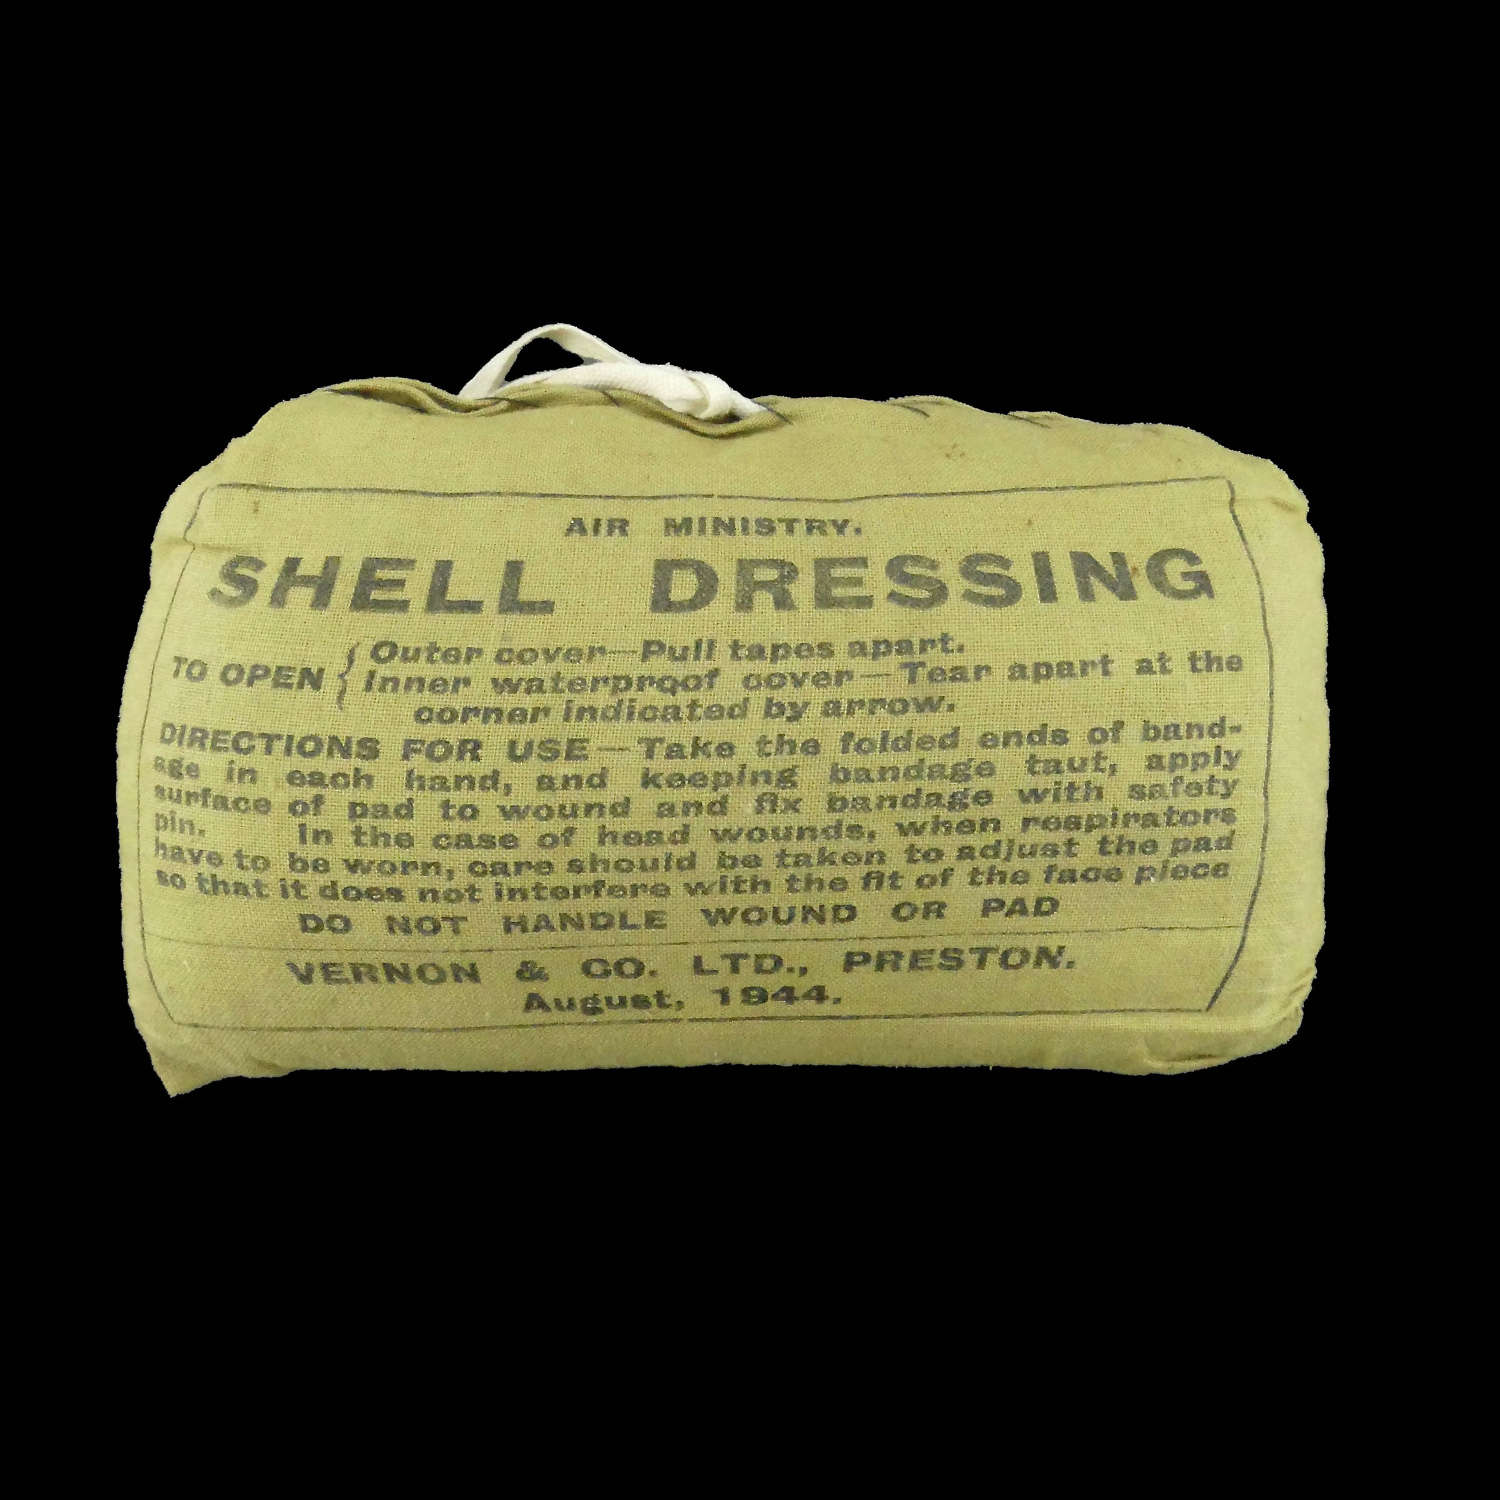 Air Ministry shell dressing, 1944